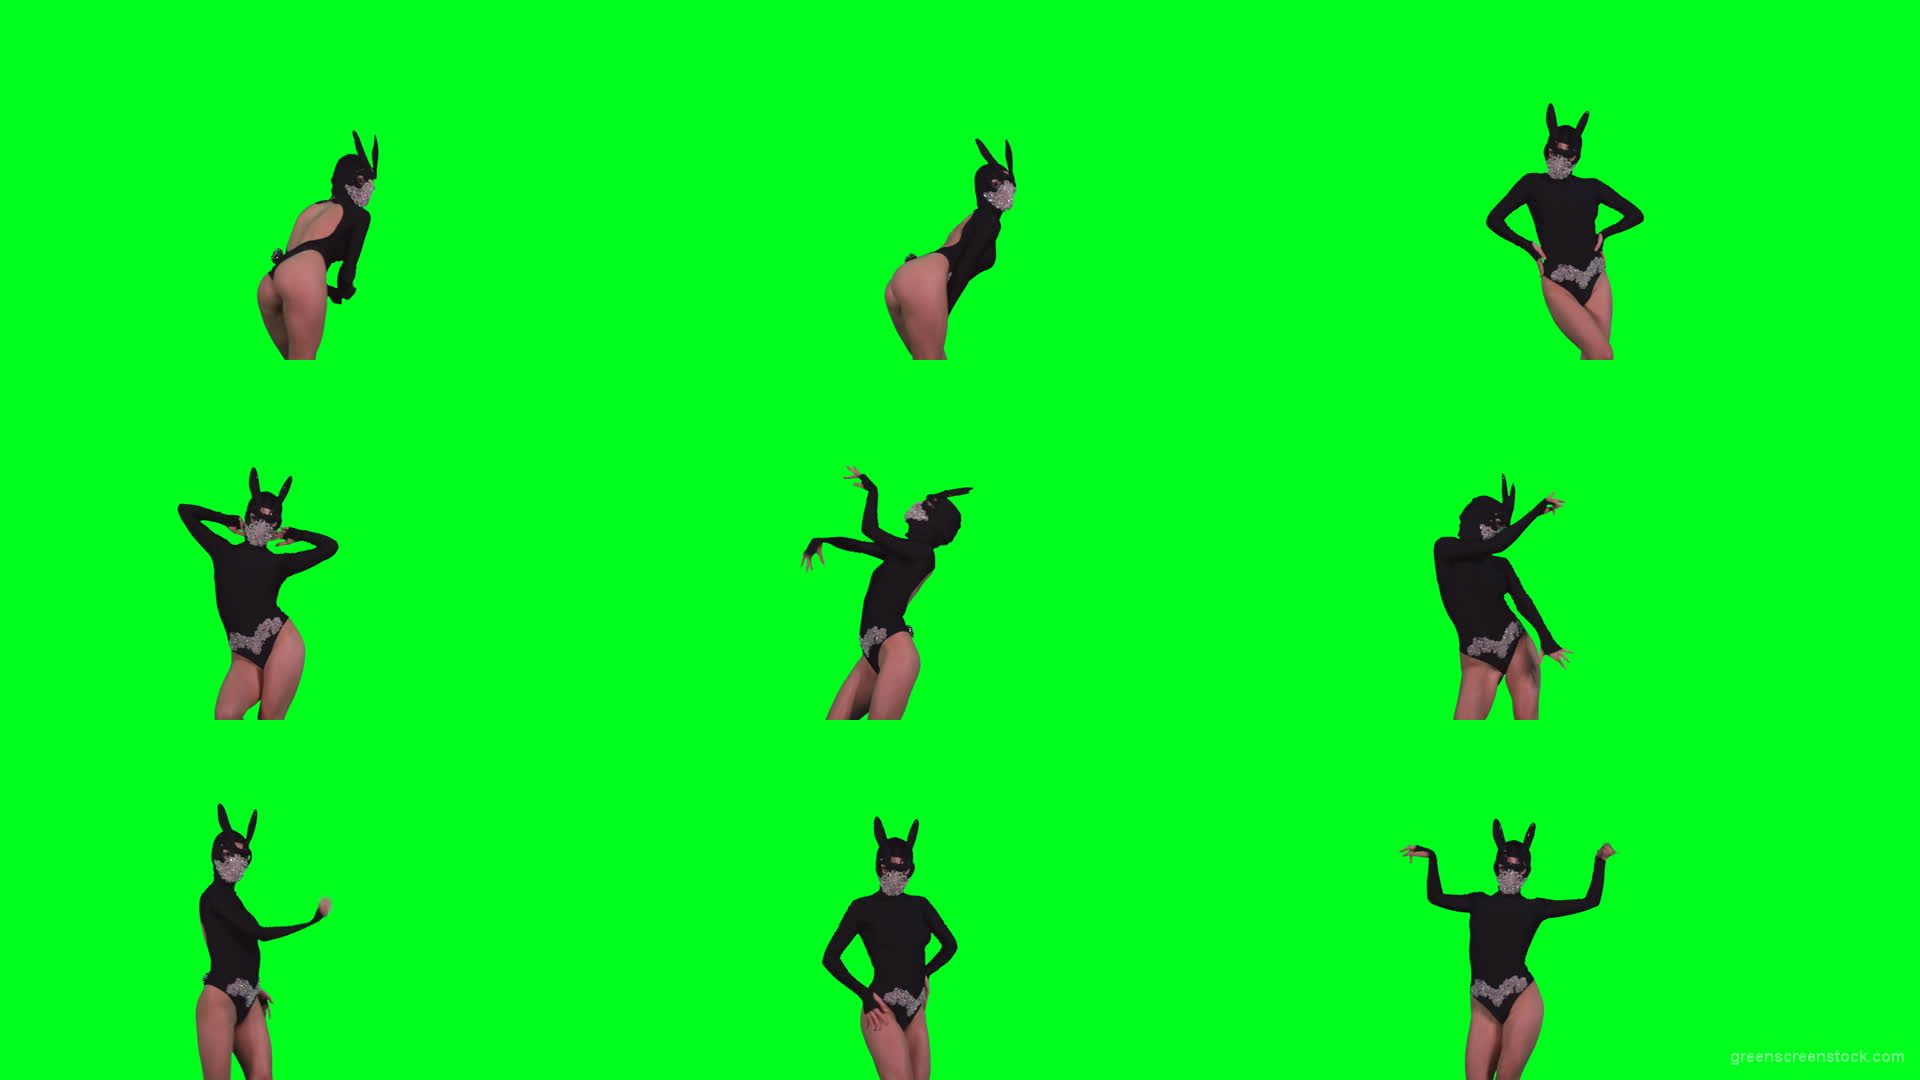 Sexy-Bunny-Girl-in-Rabbit-black-mask-chilling-with-animal-instict-isolated-on-green-screen-4K-Video-Footage-1920 Green Screen Stock